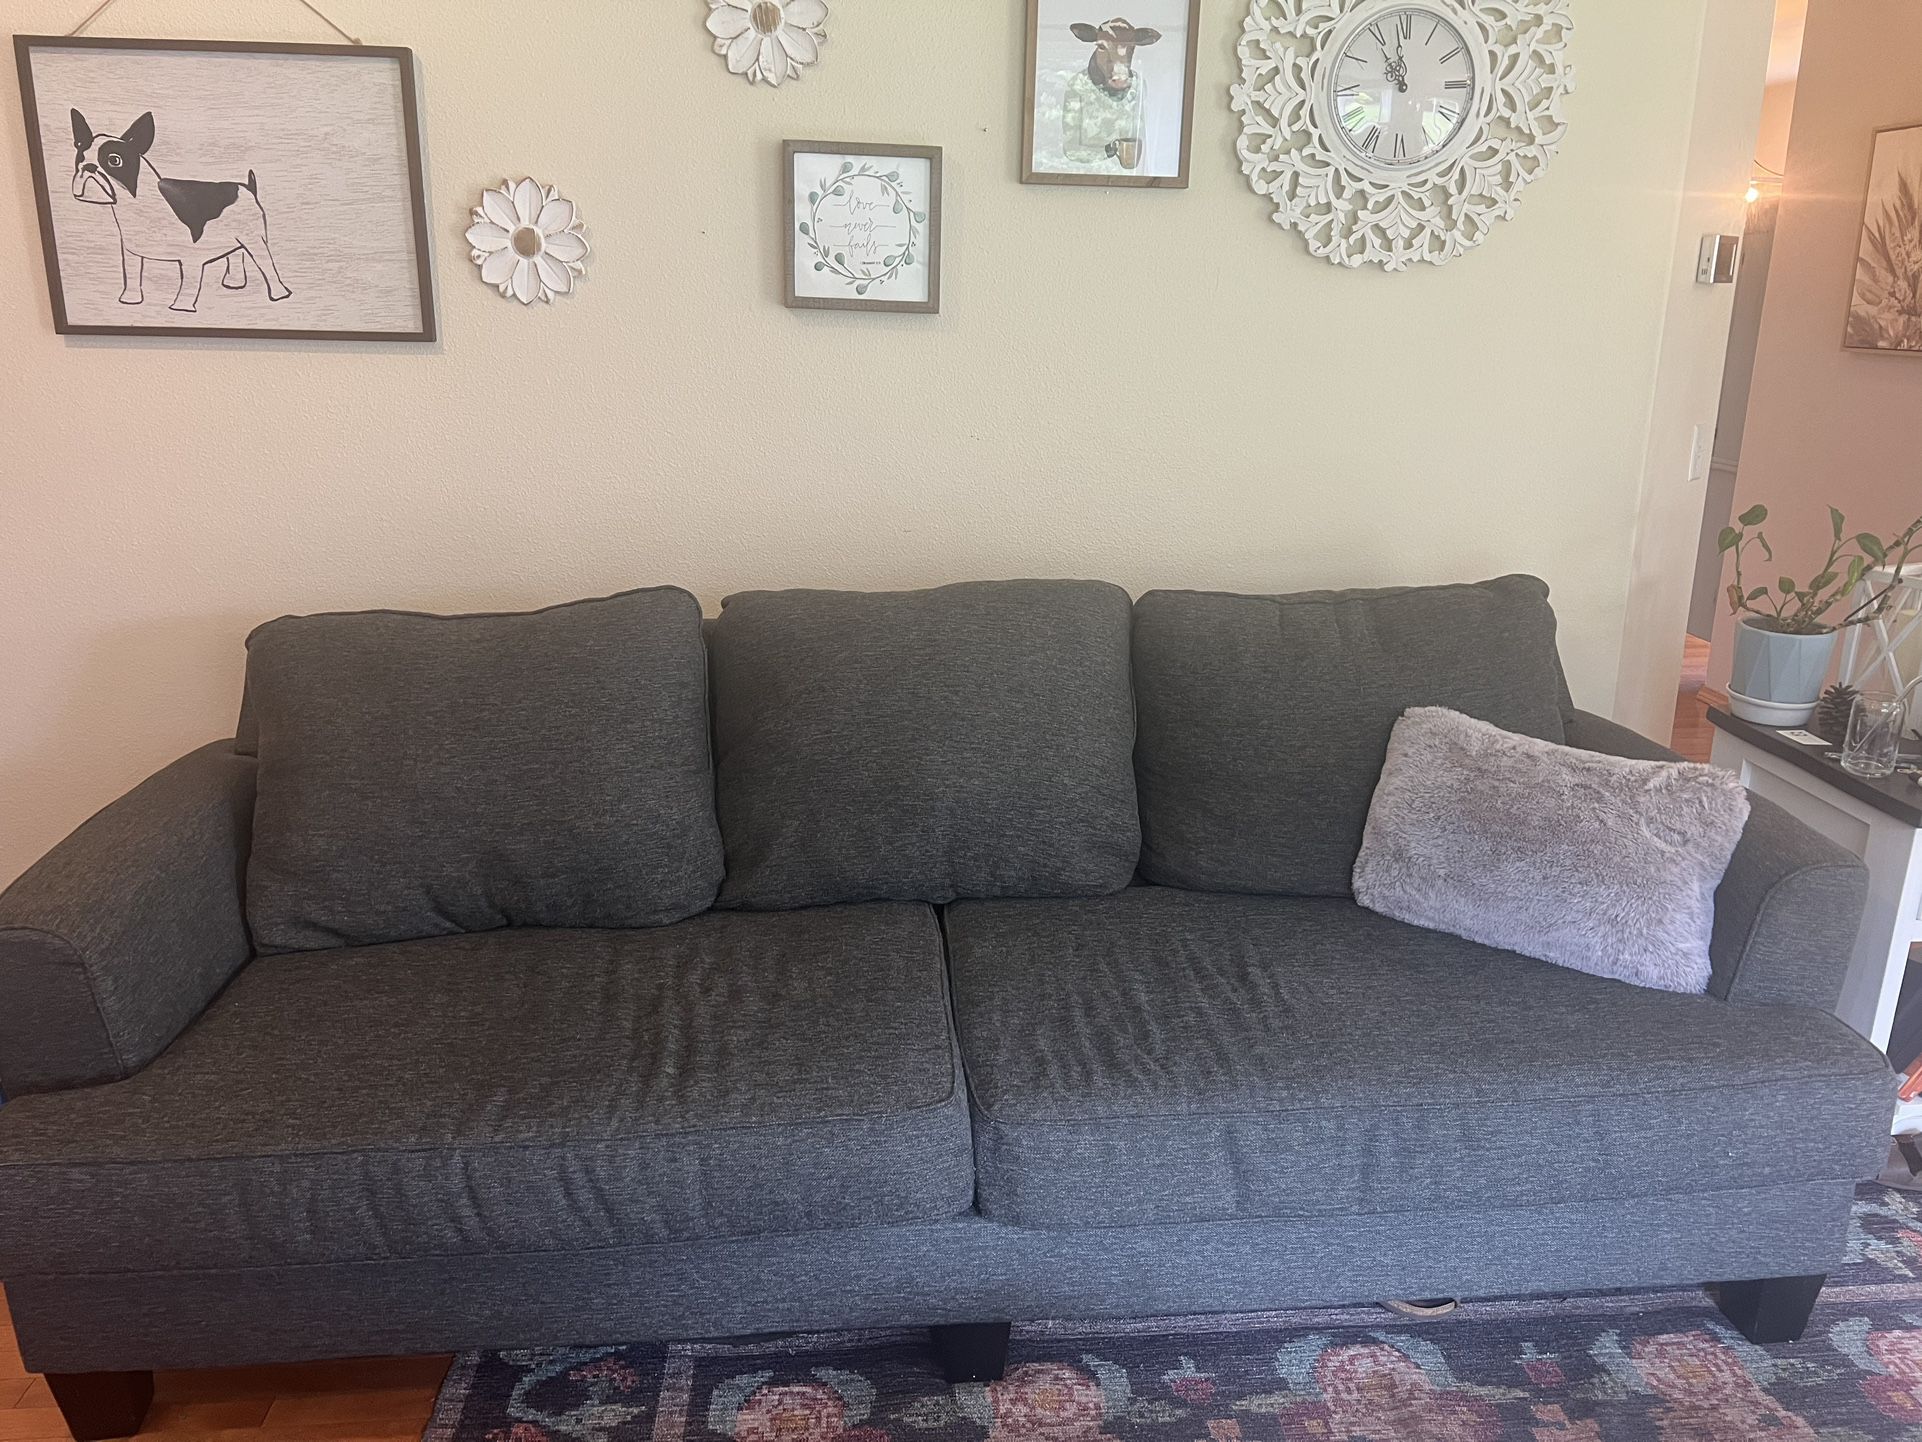 FREE - 2 Couch/Sofas - Old Cannery